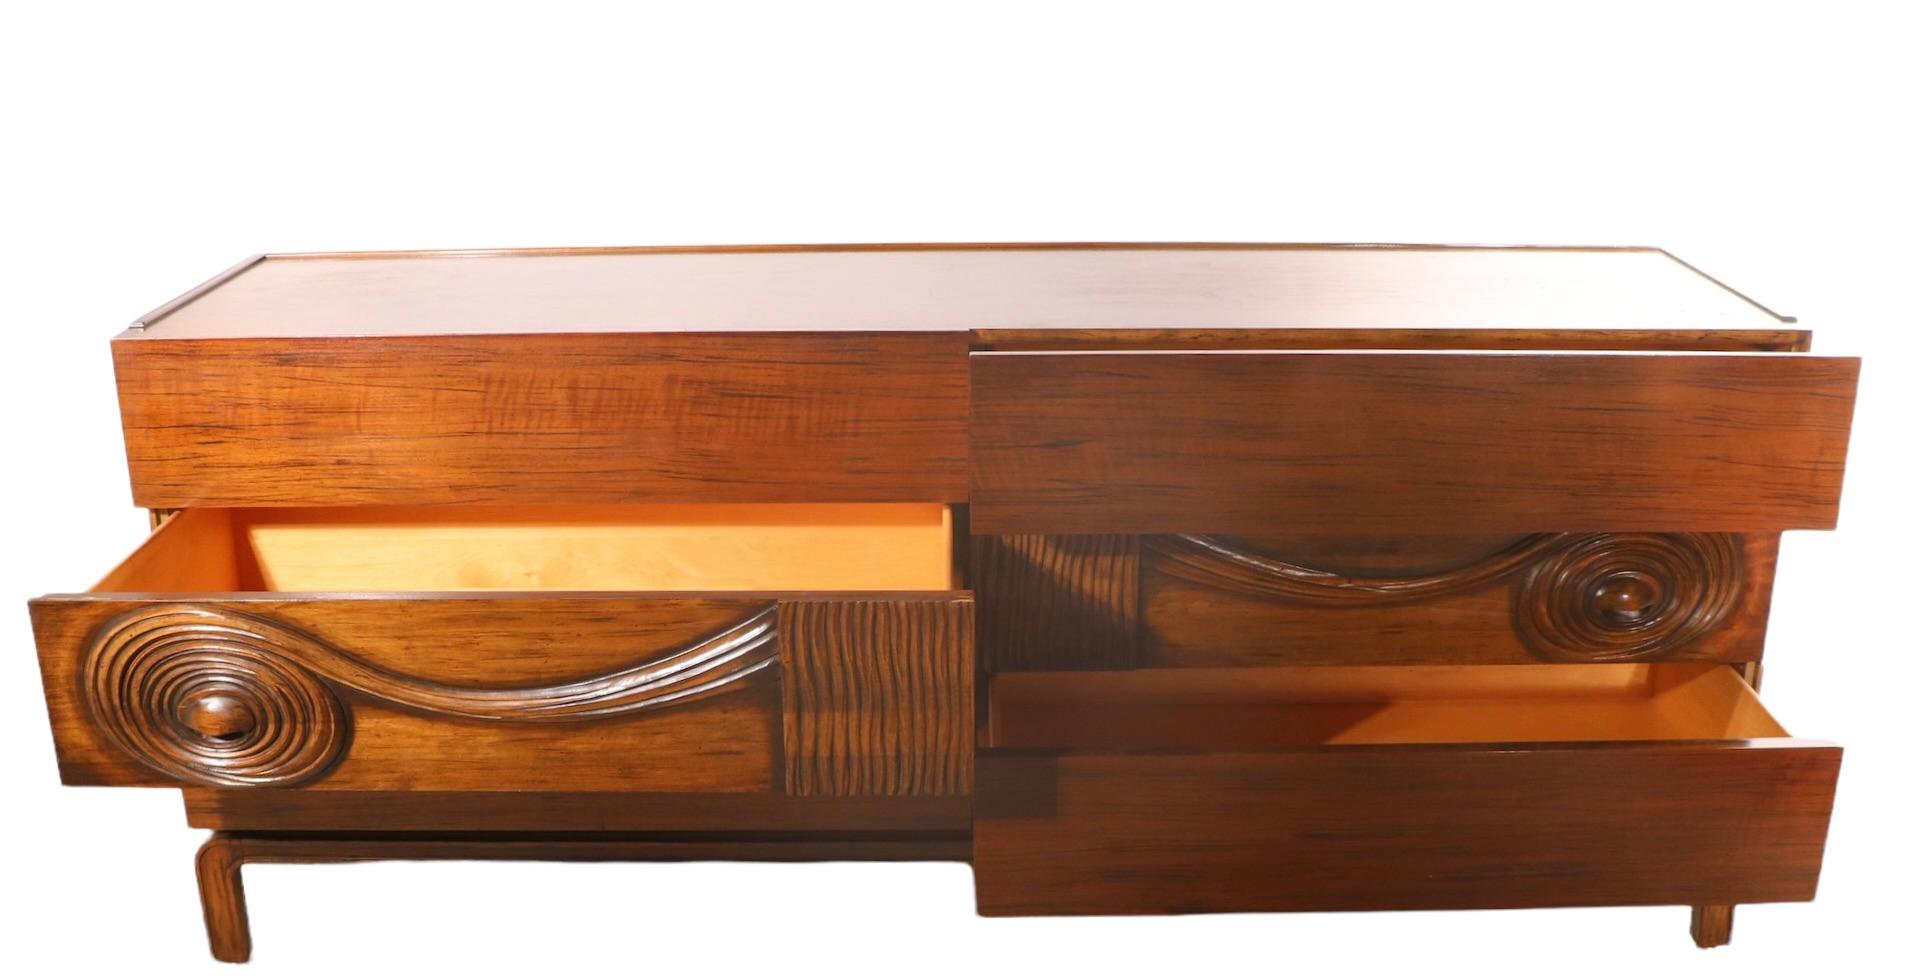 Voguish dresser designed by Edmond Spence, made in Sweden, ca. 1950/1960's. The dresser features six deep drawers, the middle drawers having  deeply carved fronts with a  dramatic swirl motif. The case is constructed of vibrant Macassar veneer, on